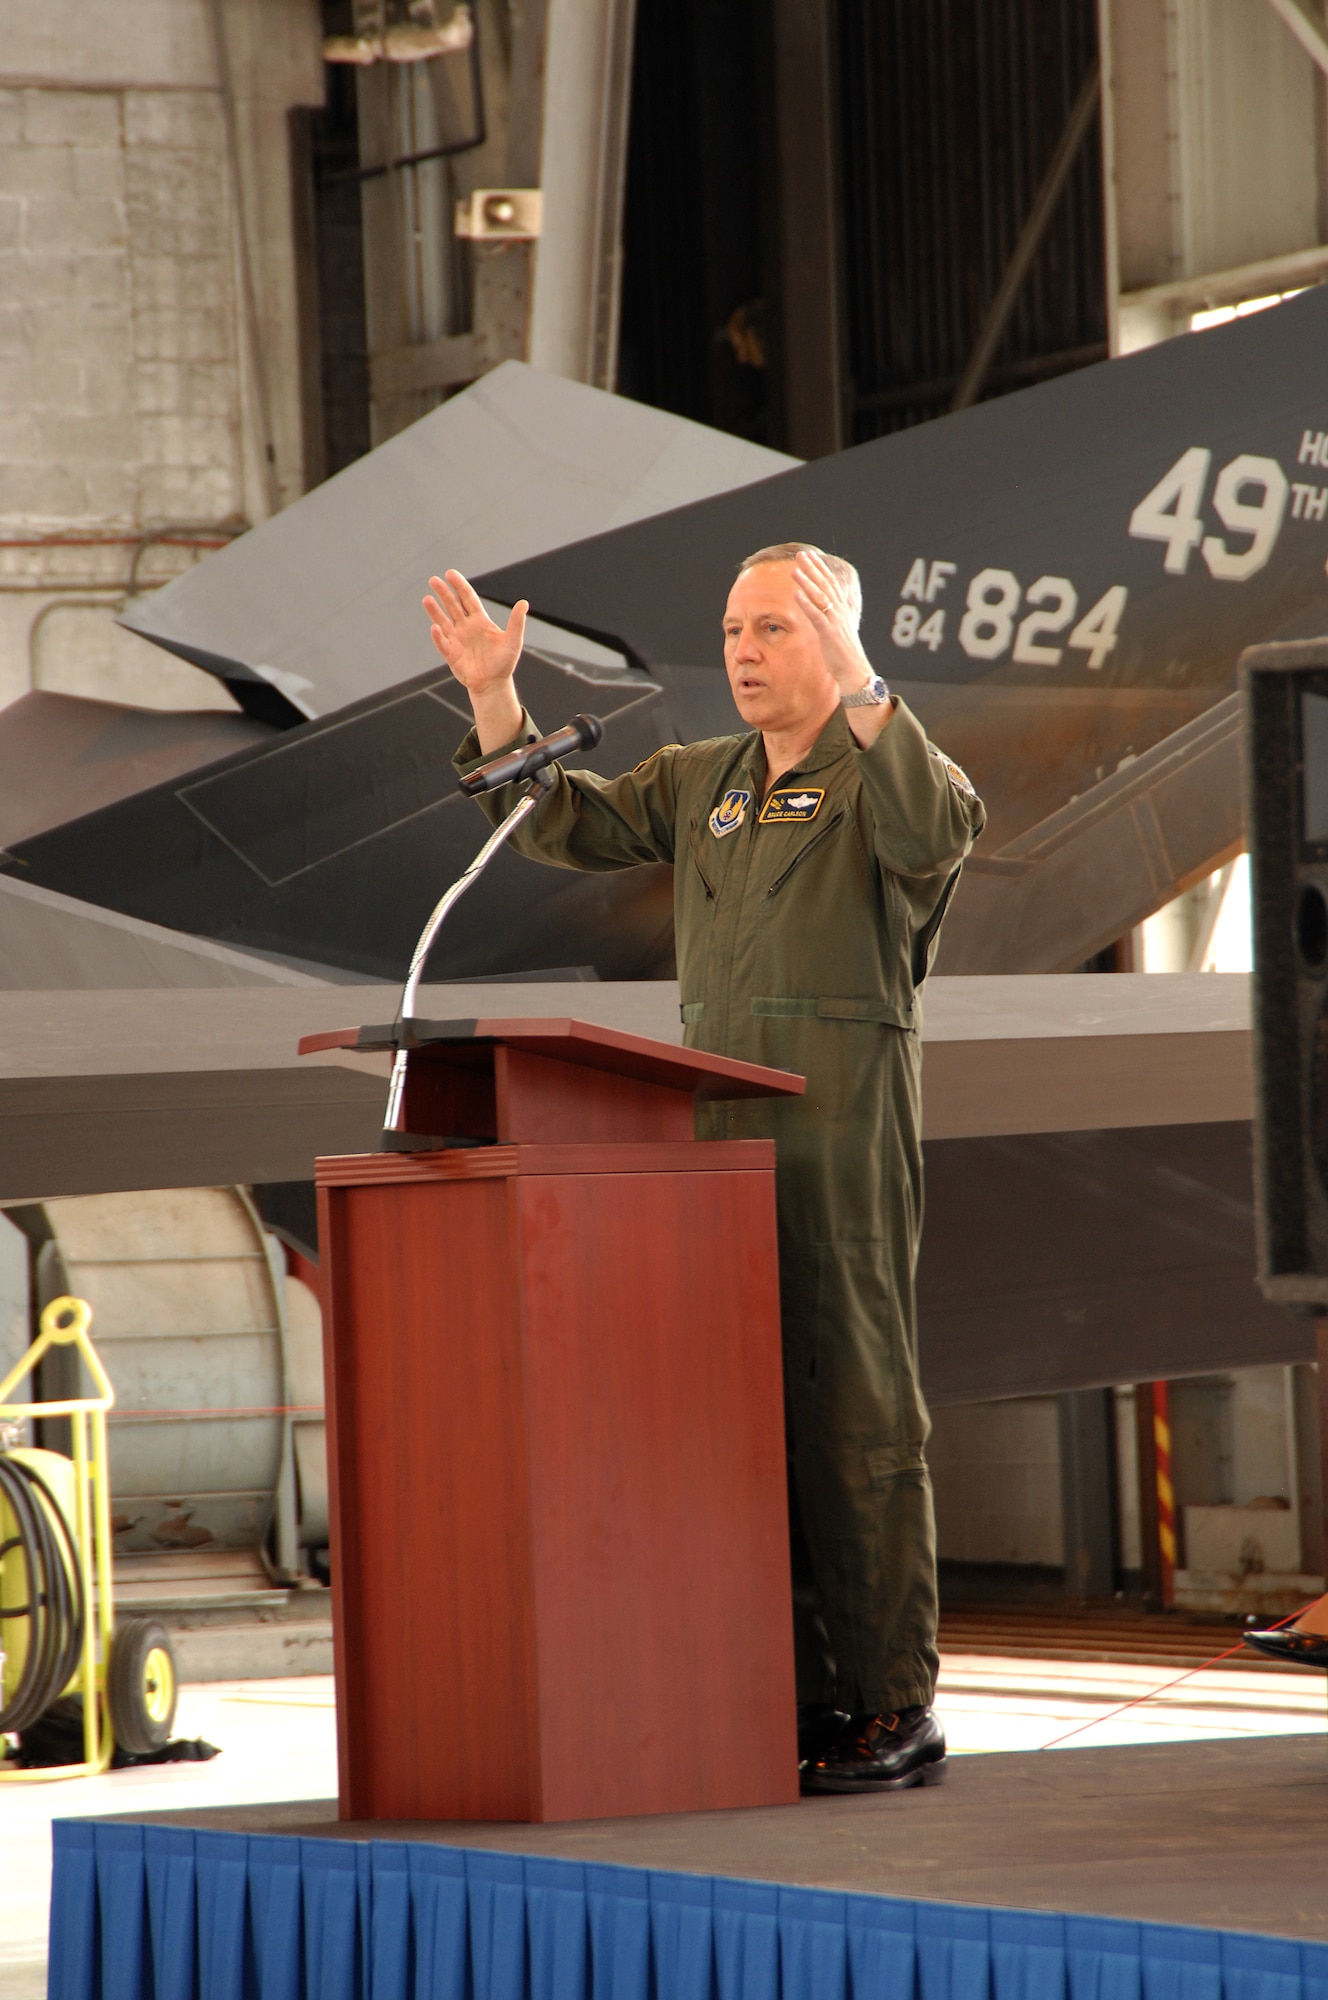 Gen. Bruce Carlson, Air Force Materiel Command commander, speaks during a retirement ceremony honoring the F-117A Nighthawk.  The Air Force is retiring the stealth fighter fleet because newer capabilities exist and it is expensive to operate and maintain.  Savings will be applied to help modernize the across the Air Force. (U.S. Air Force photo by Ben Strasser)